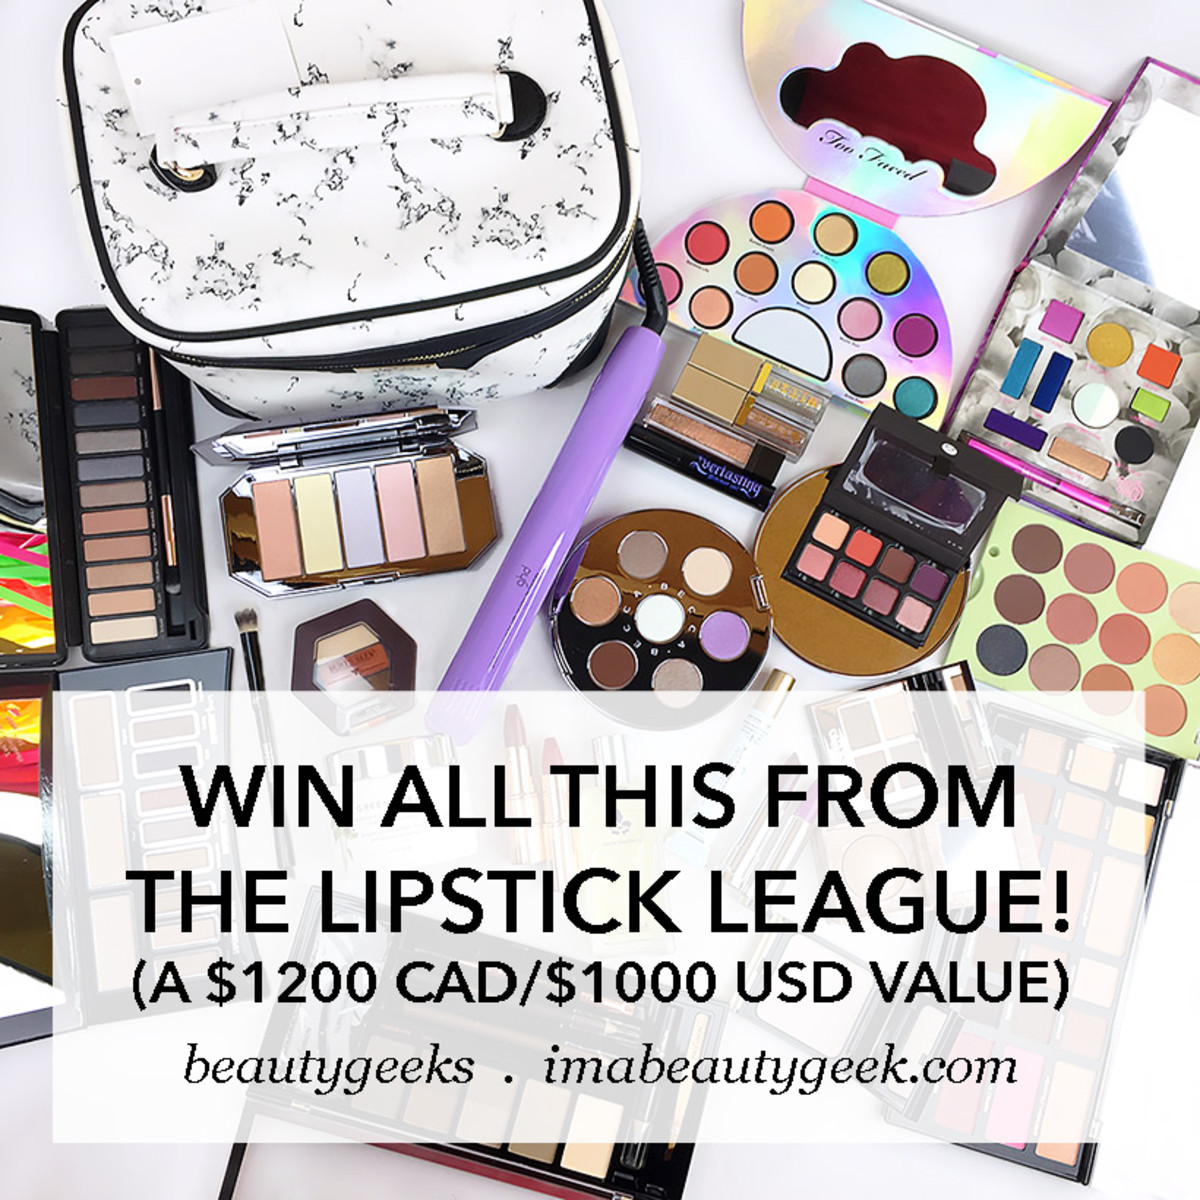 Lipstick League giveaway 2018 worth $1200 CAD or $1000 USD-BEAUTYGEEKS